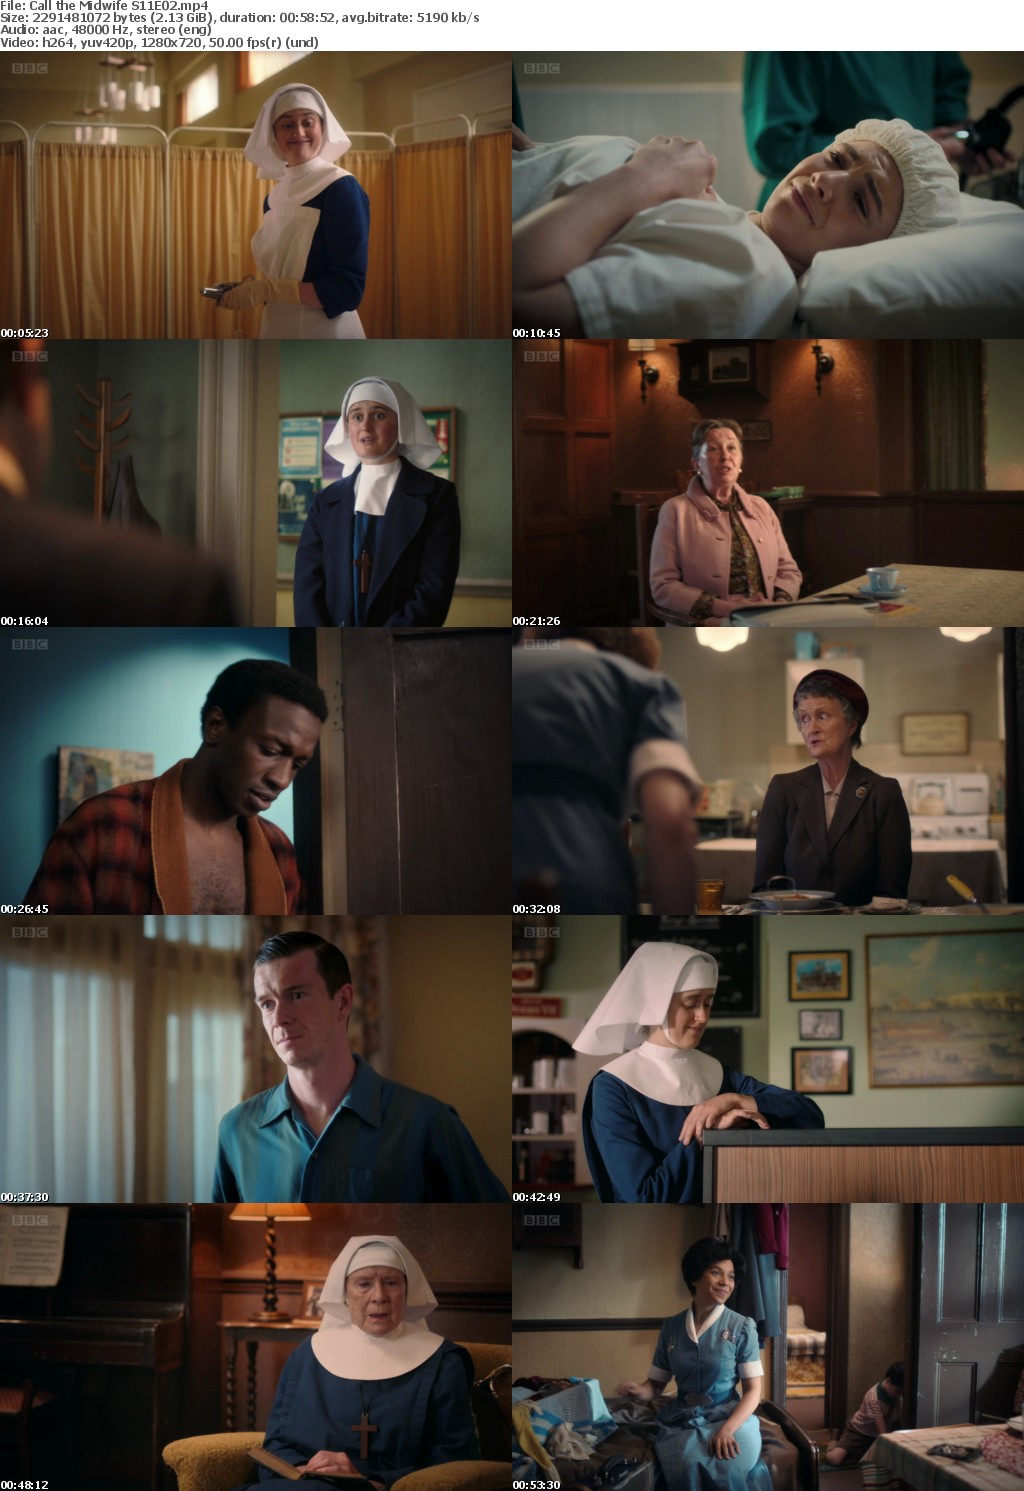 Call the Midwife S11E02 (1280x720p HD, 50fps, soft Eng subs)